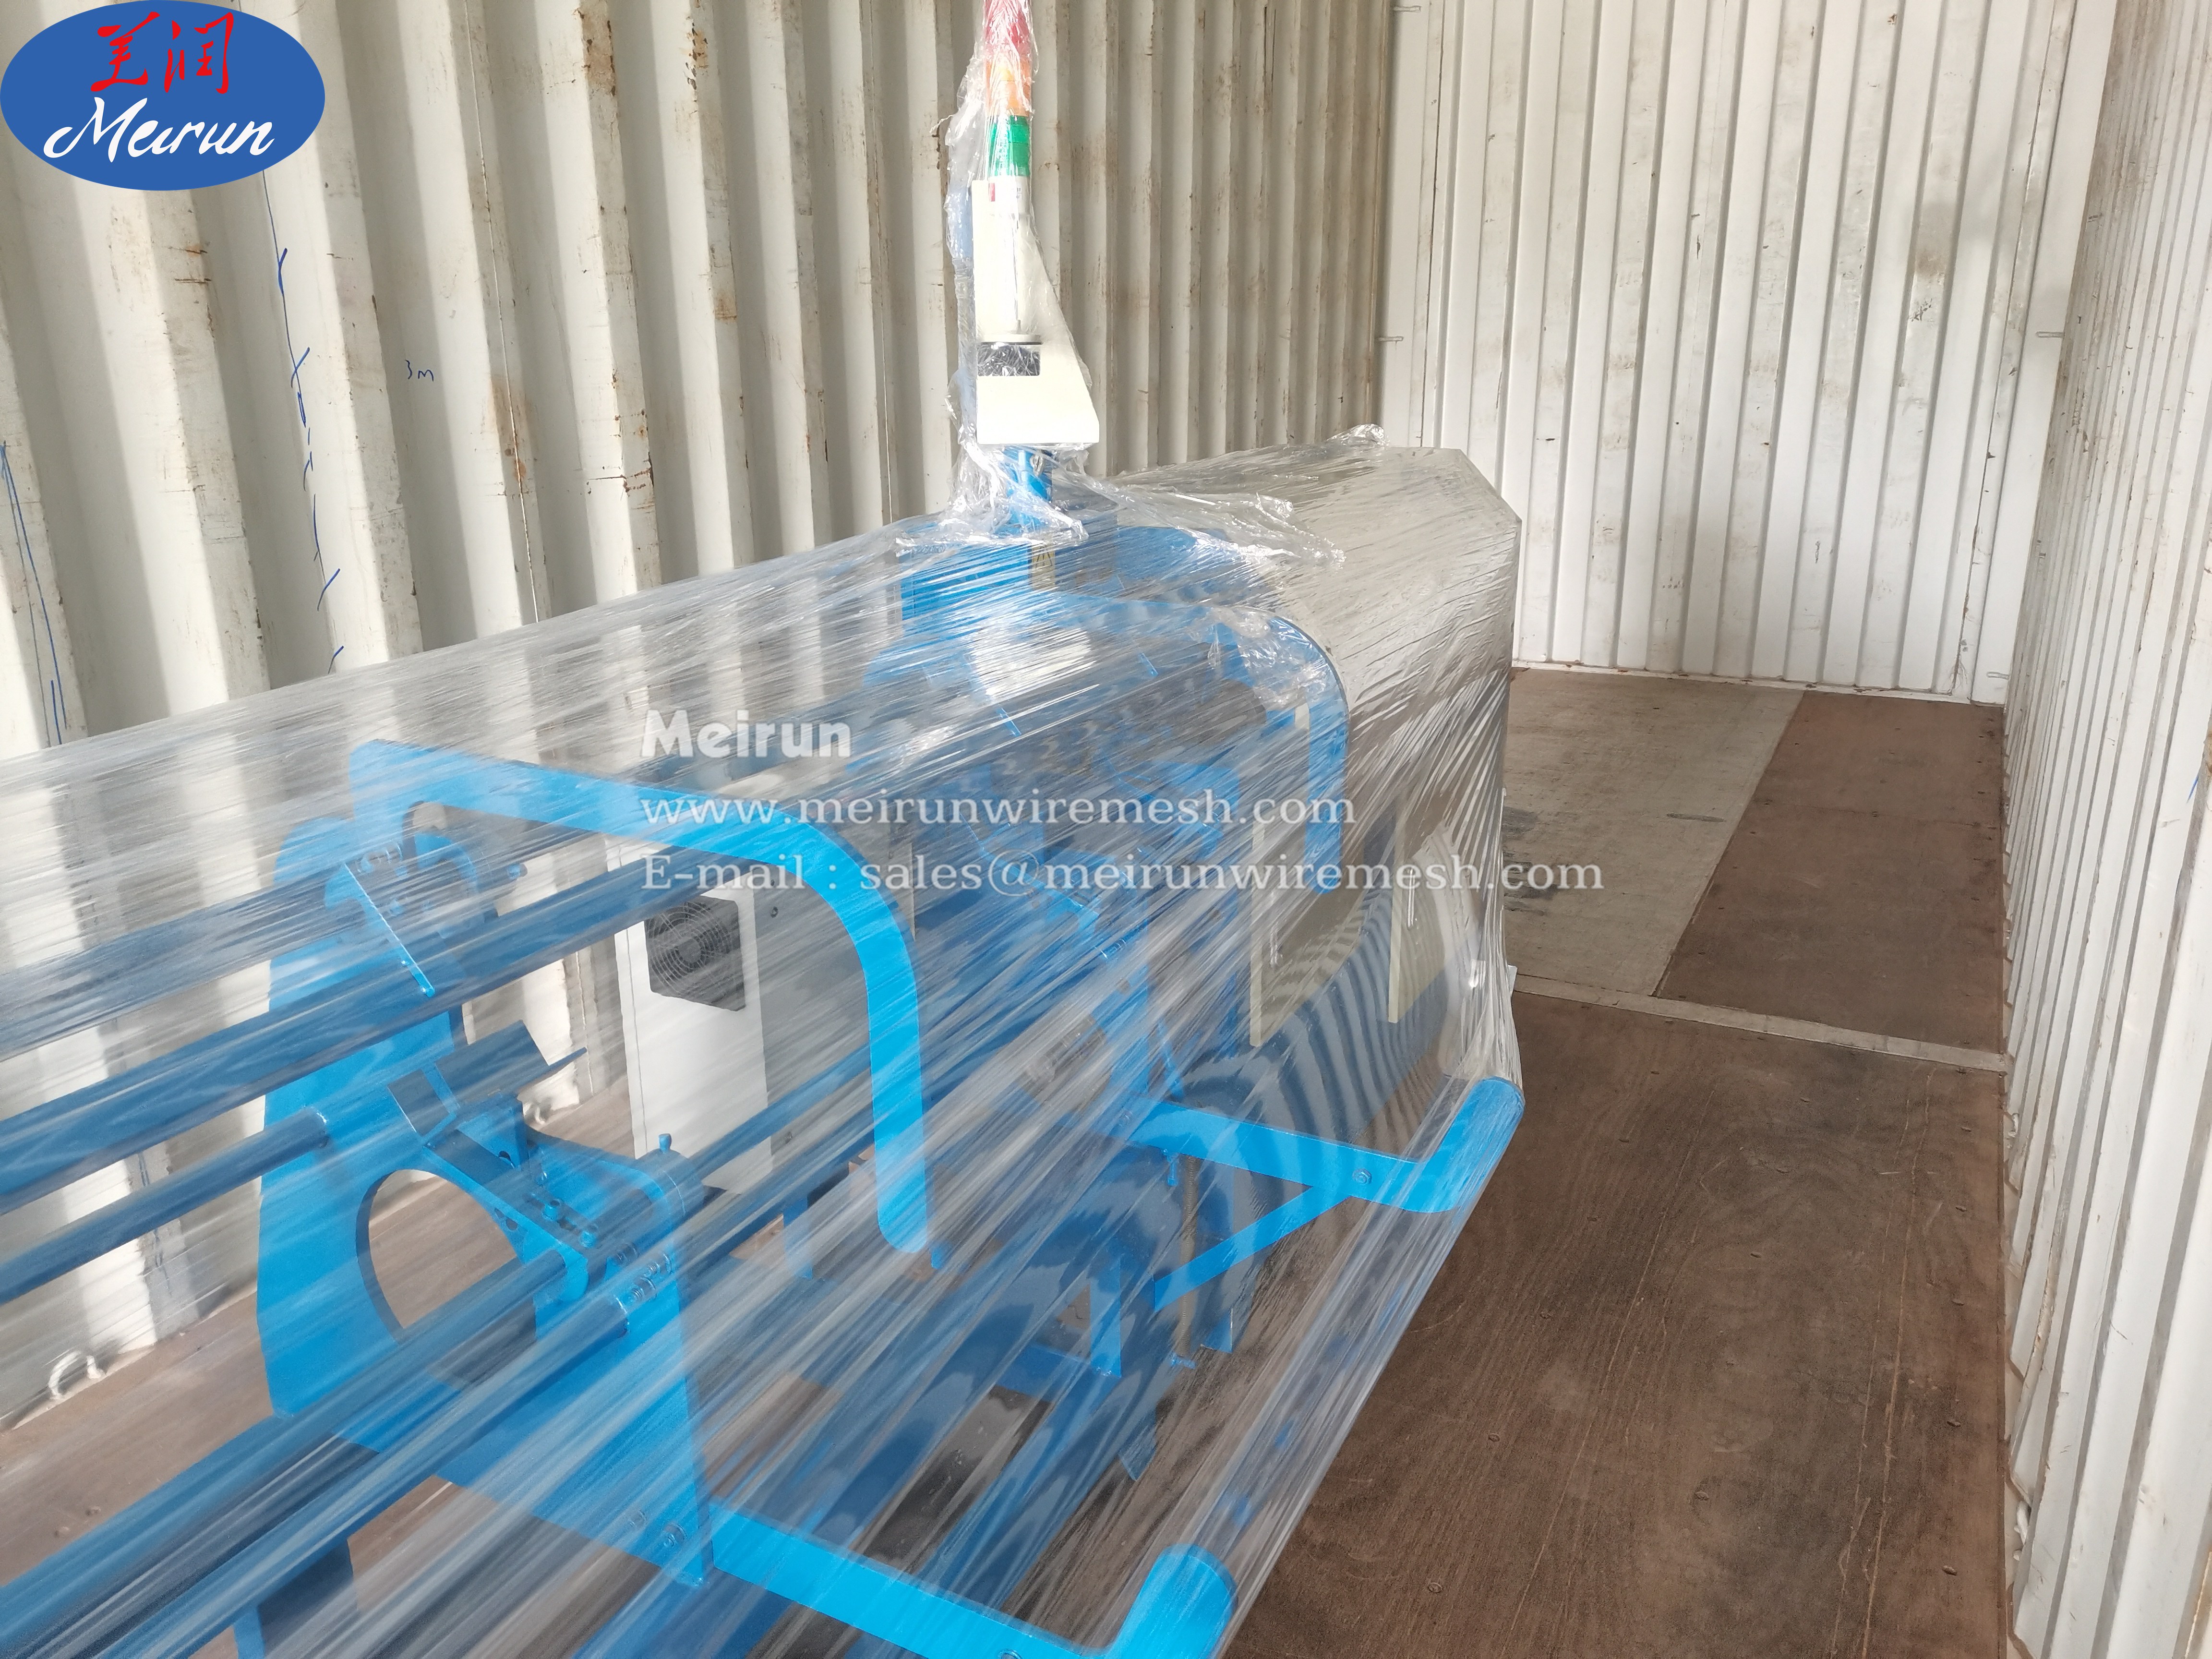 High Safety Level Automatic Quick Link Cotton Baling Wire Machine Single Head Tie Wire Baling Machine